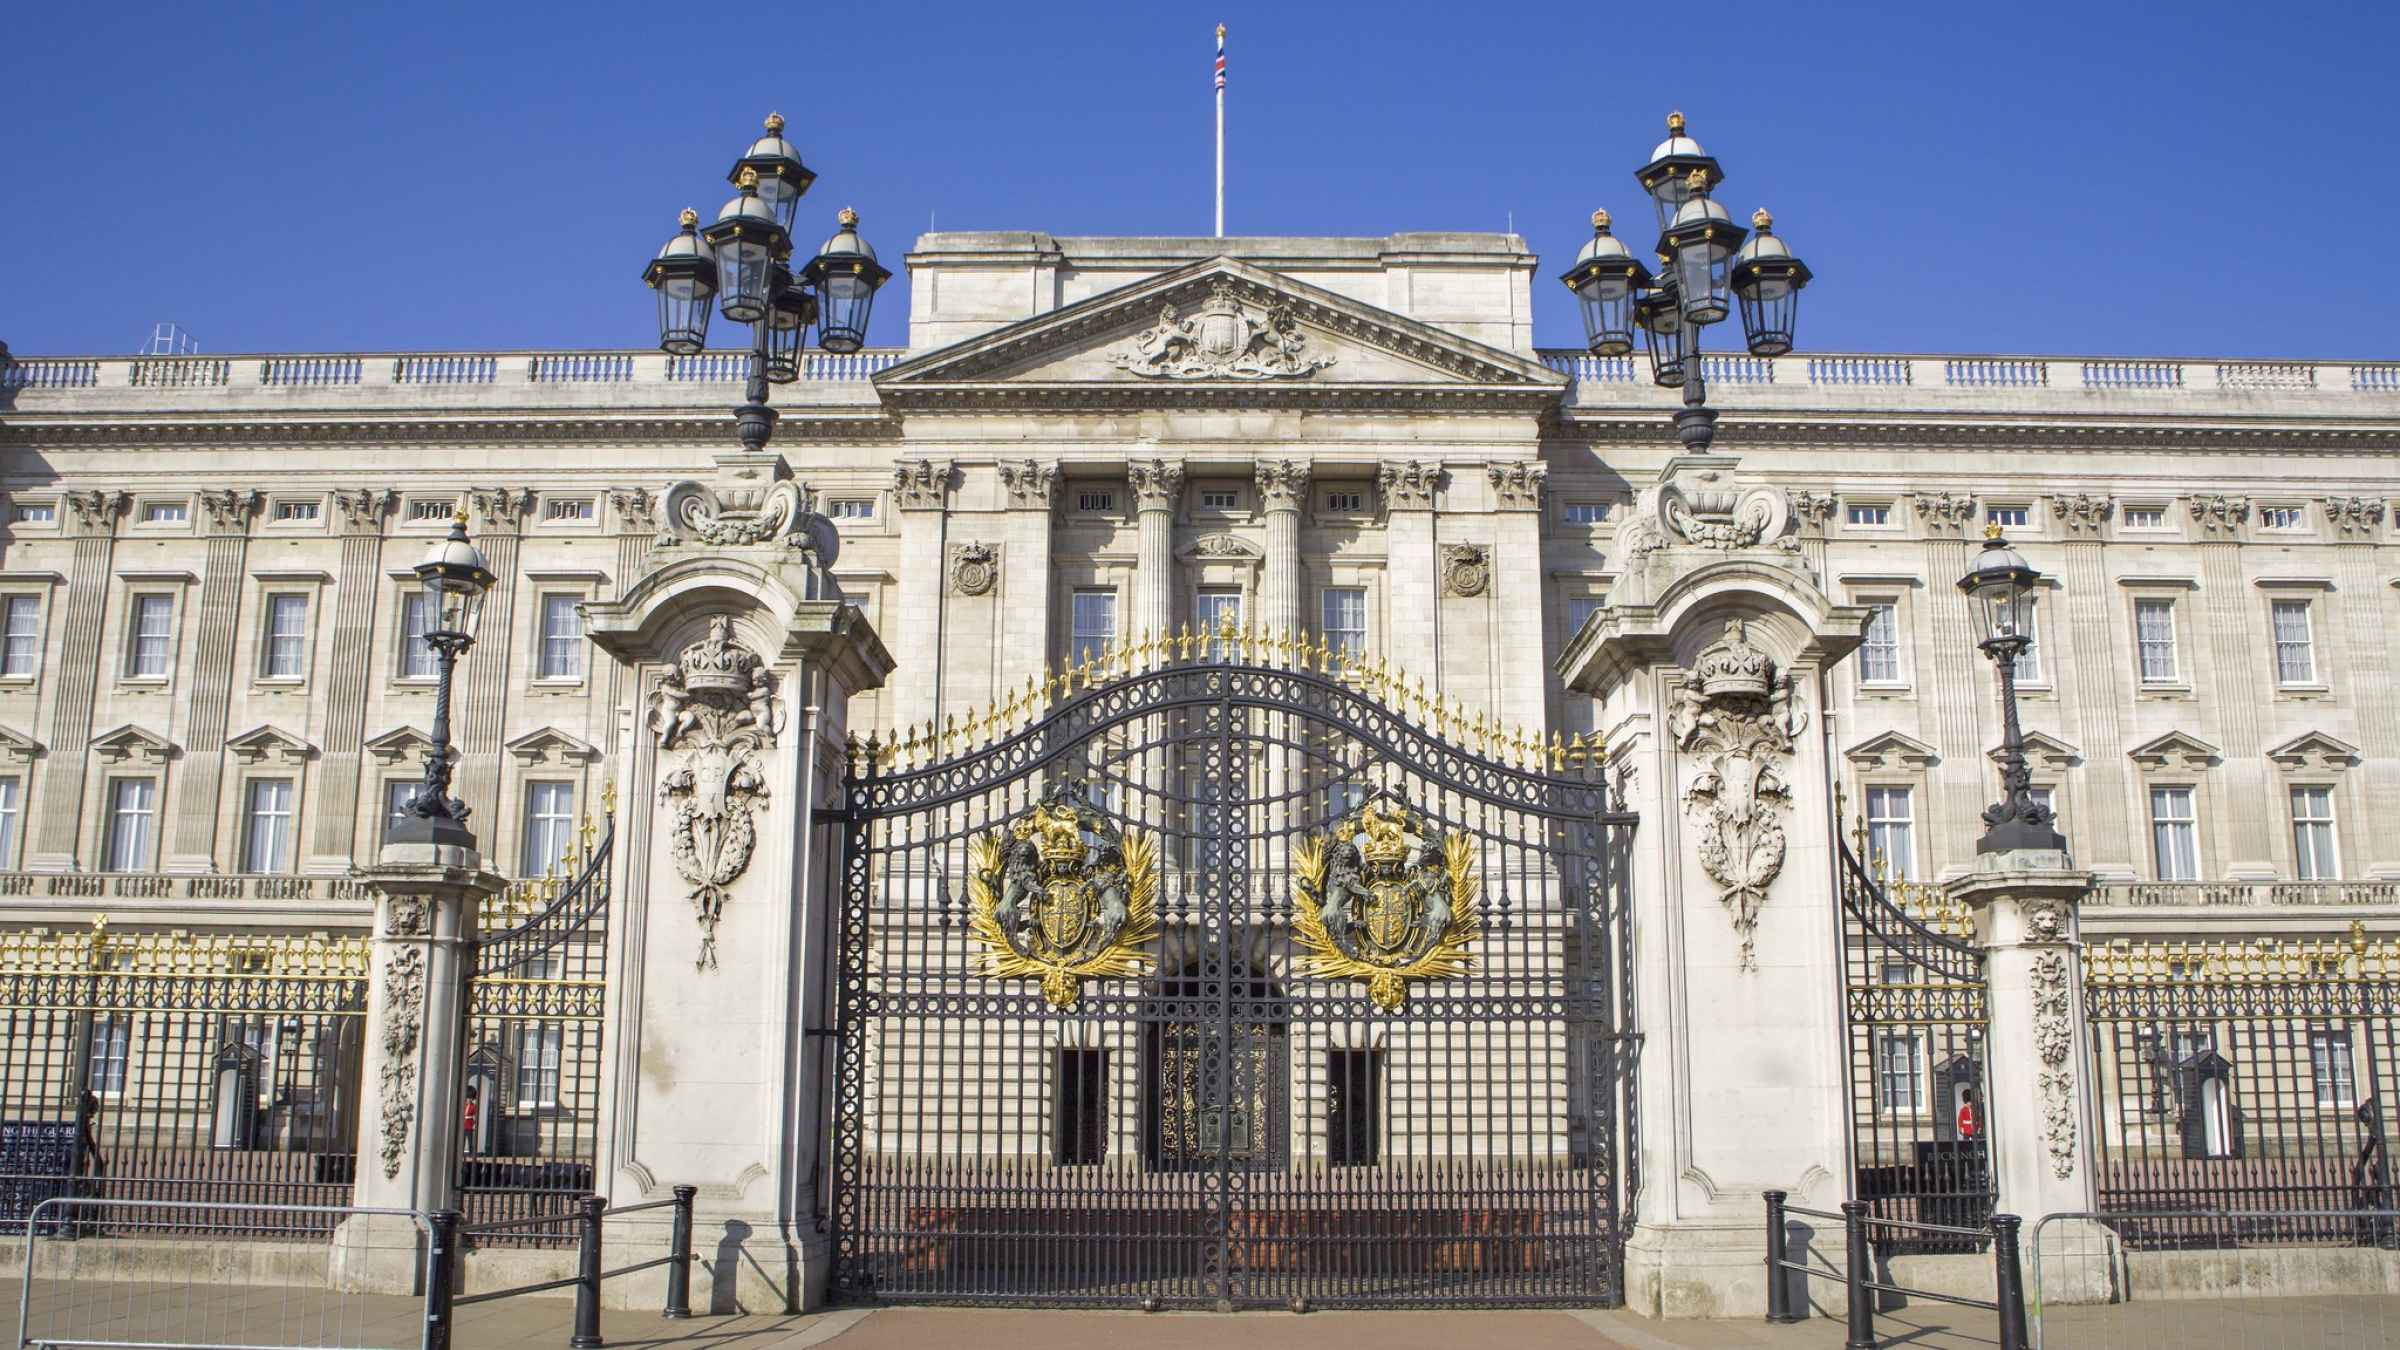 Buckingham Palace Castle & Palace Tours GetYourGuide